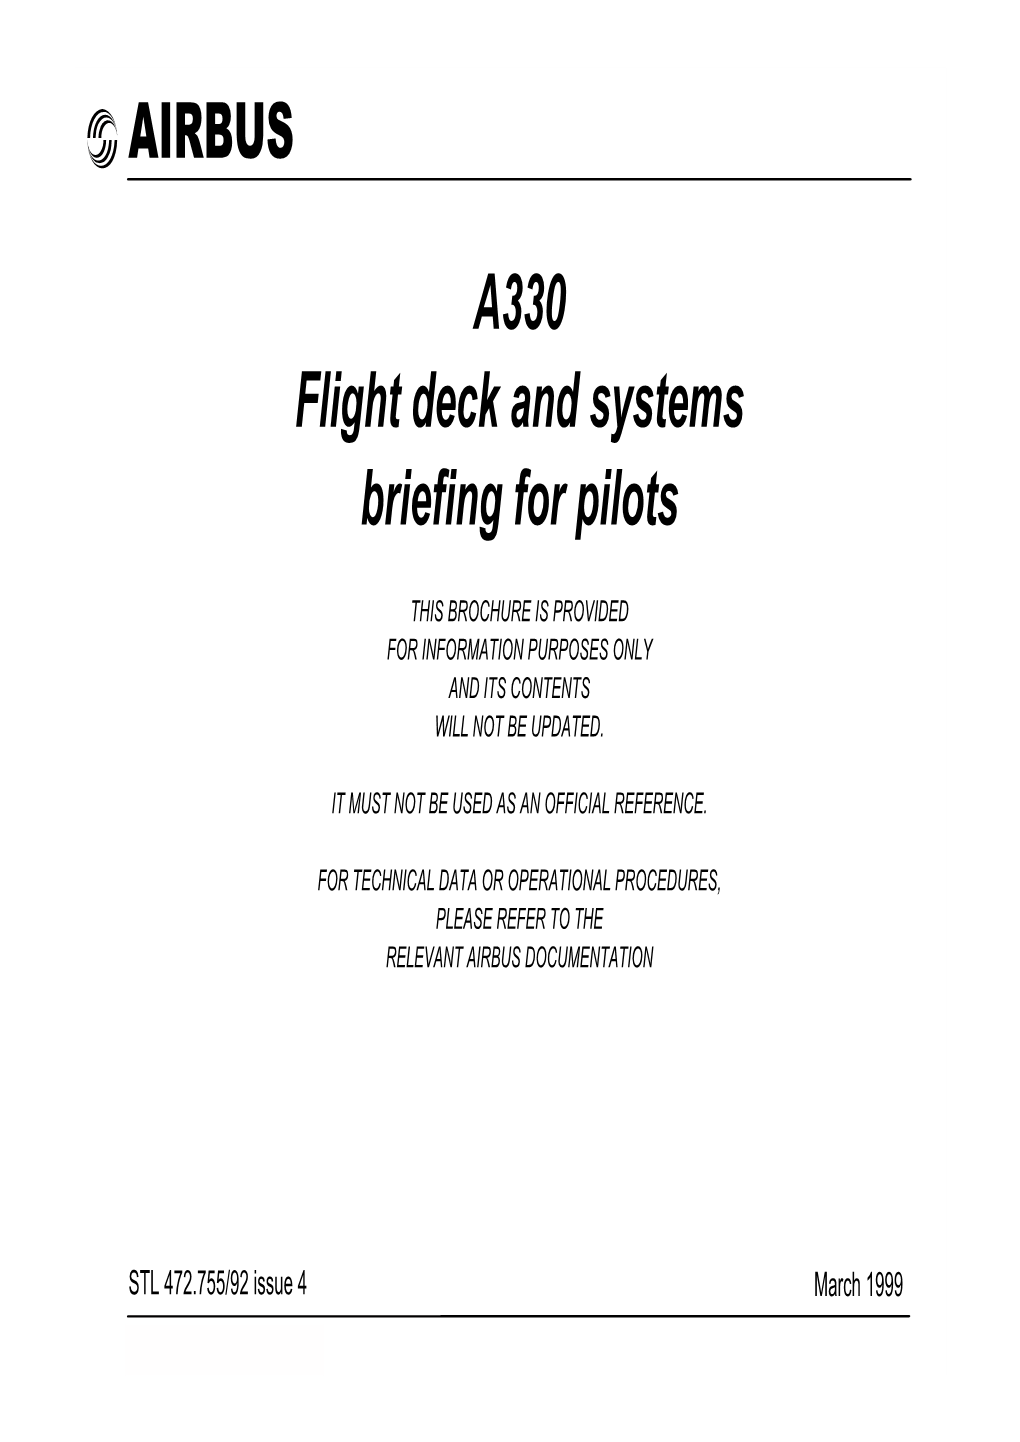 AIRBUS A330 Flight Deck and Systems Briefing for Pilots